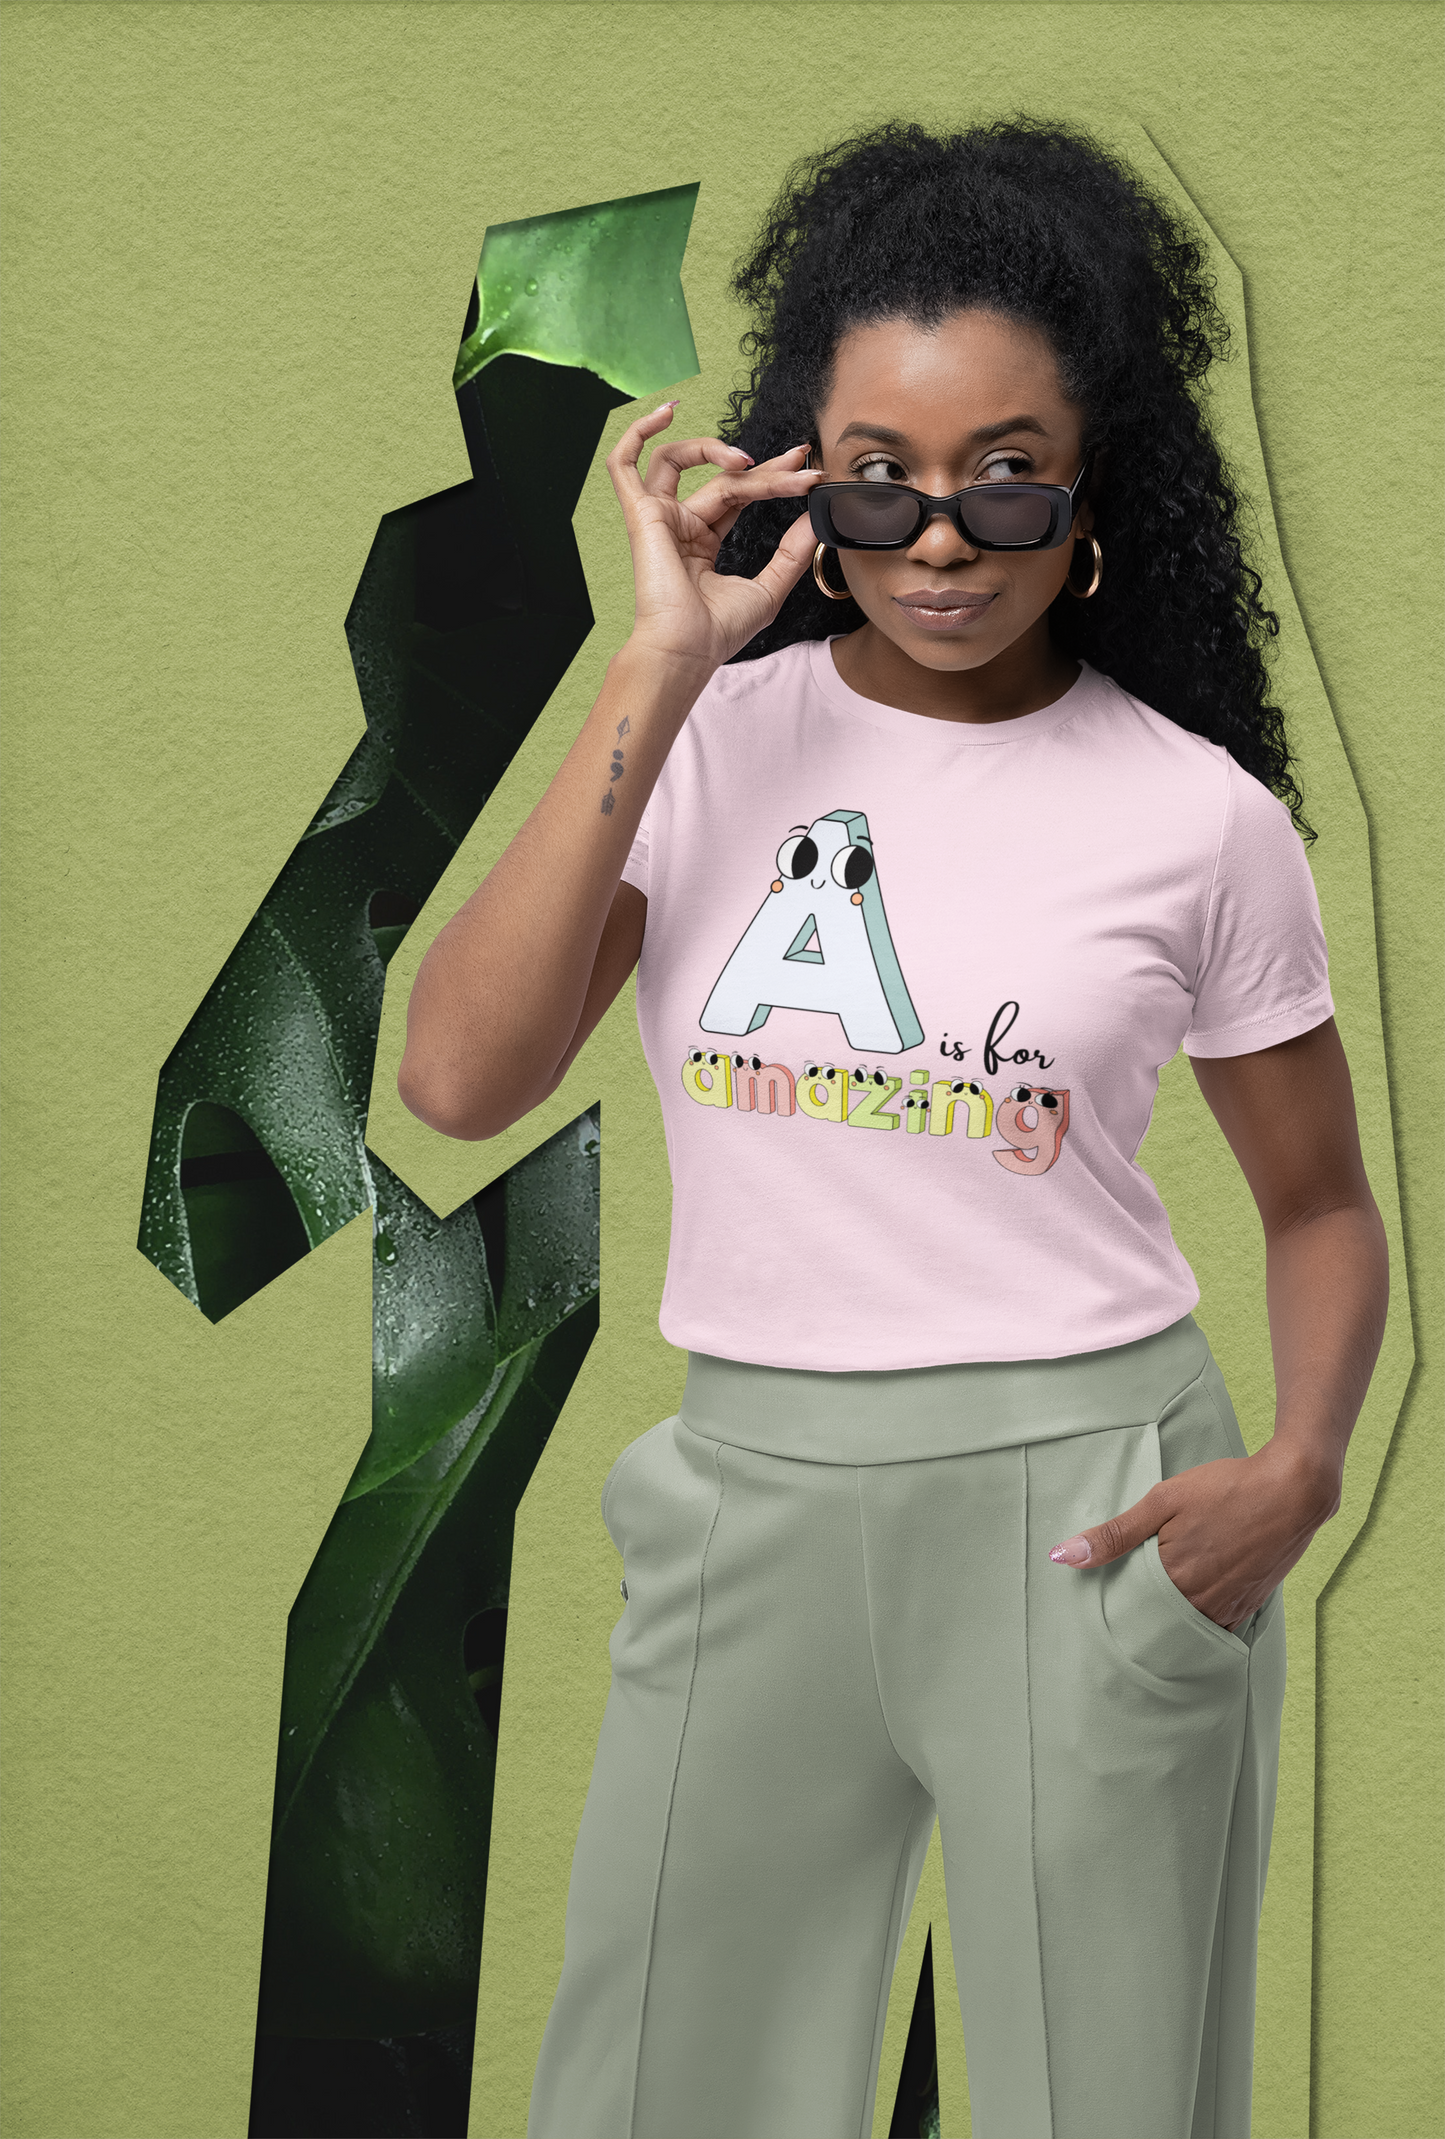 A Is For Amazing - Women's Midweight Cotton Tee